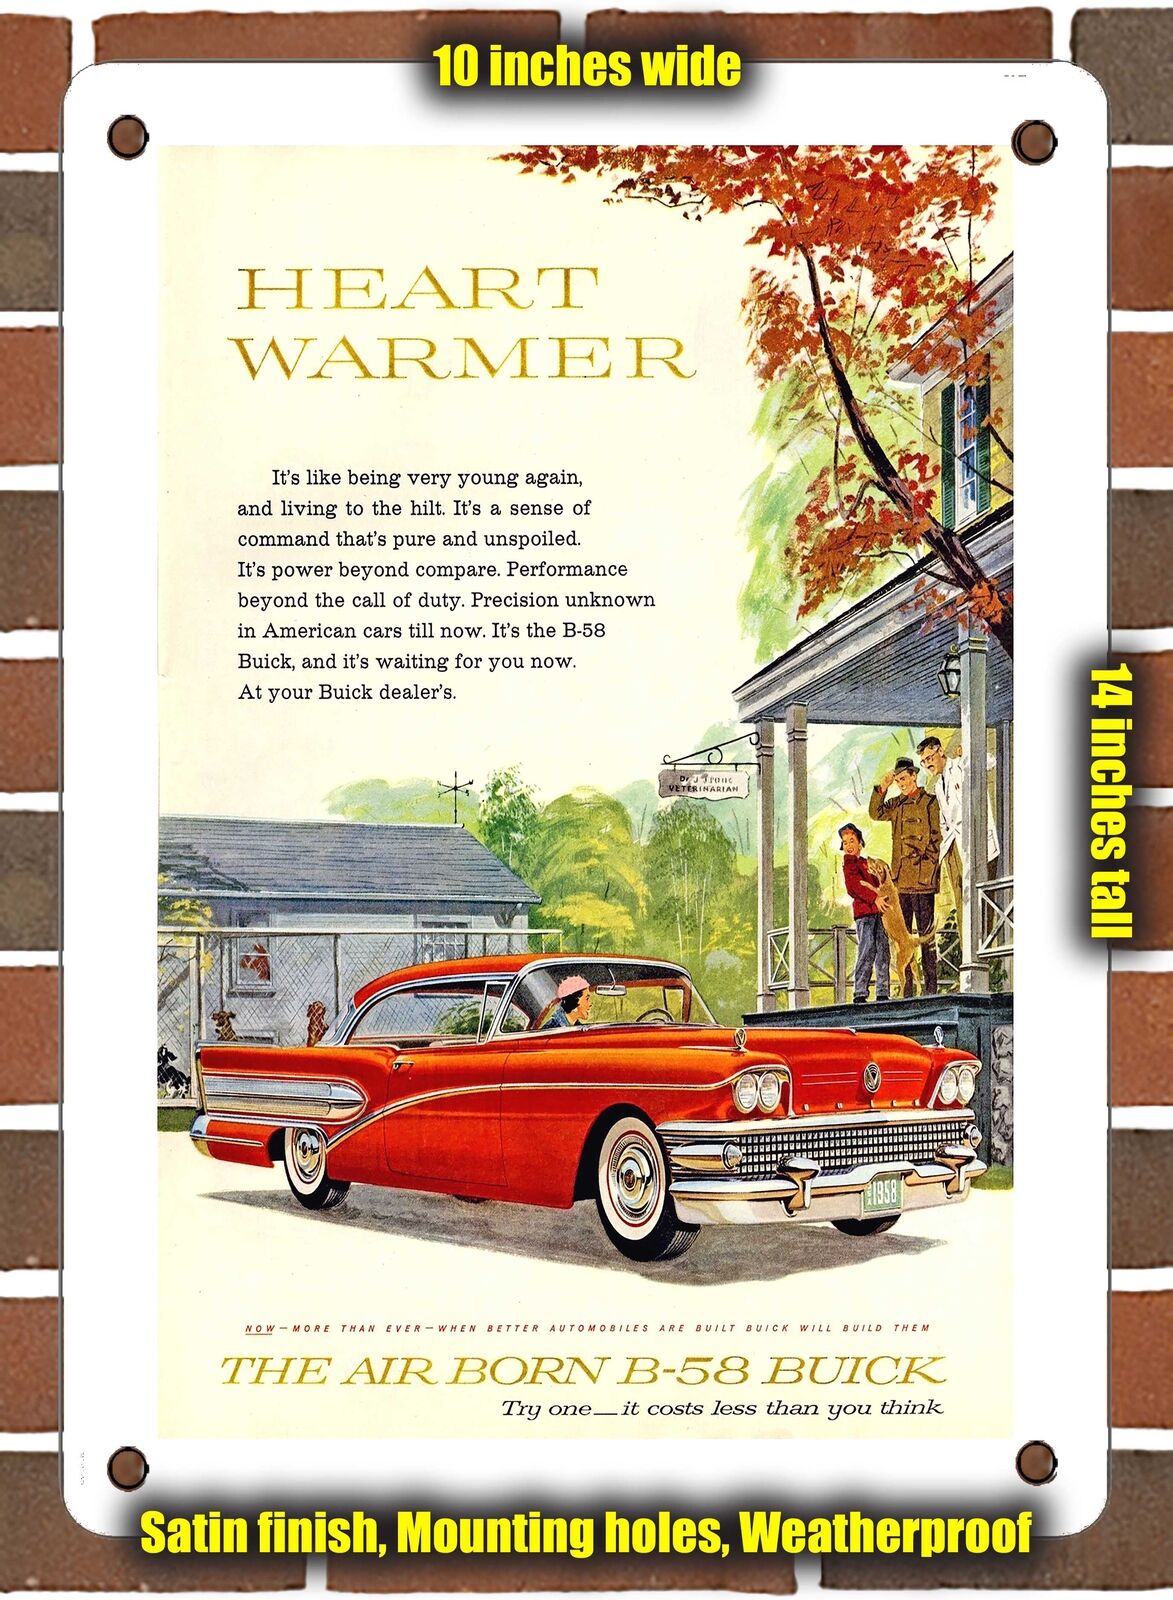 METAL SIGN - 1958 Buick B 58 Heart Warmer - 10x14 Inches